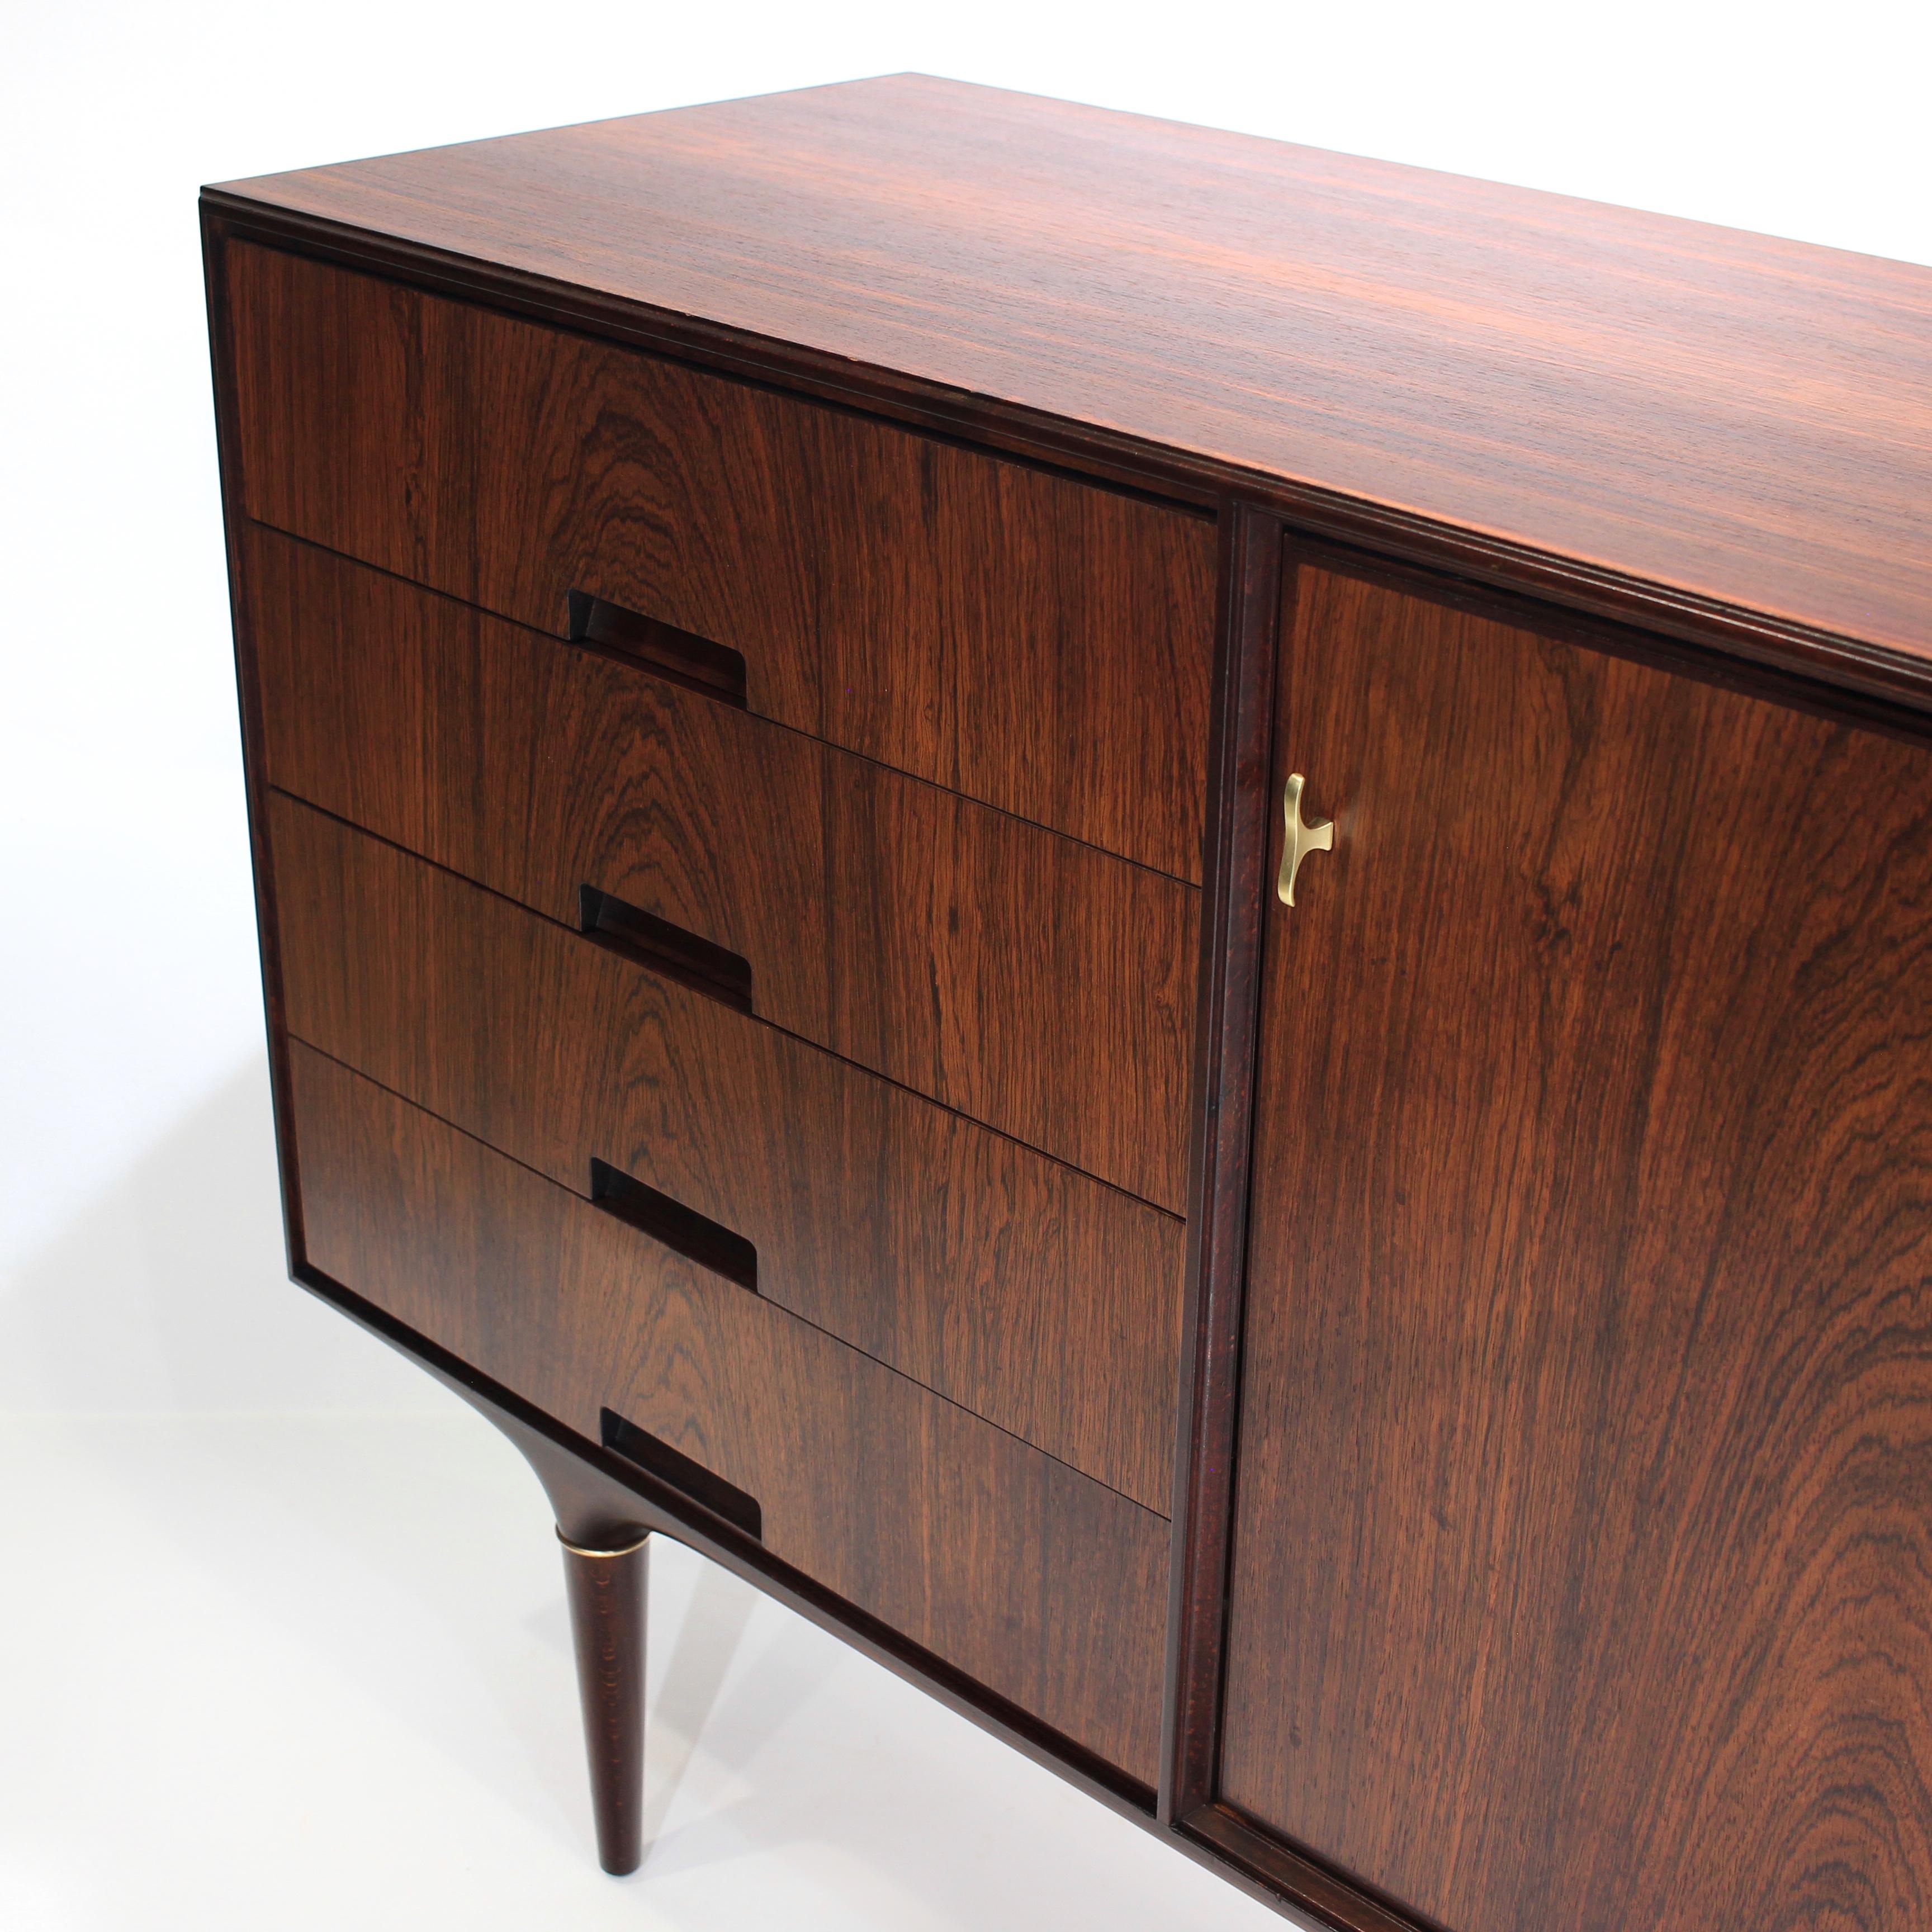 Lacquered Mid-Century Scandinavian Rosewood Credenza by Svante Skogh for Seffle of Sweden